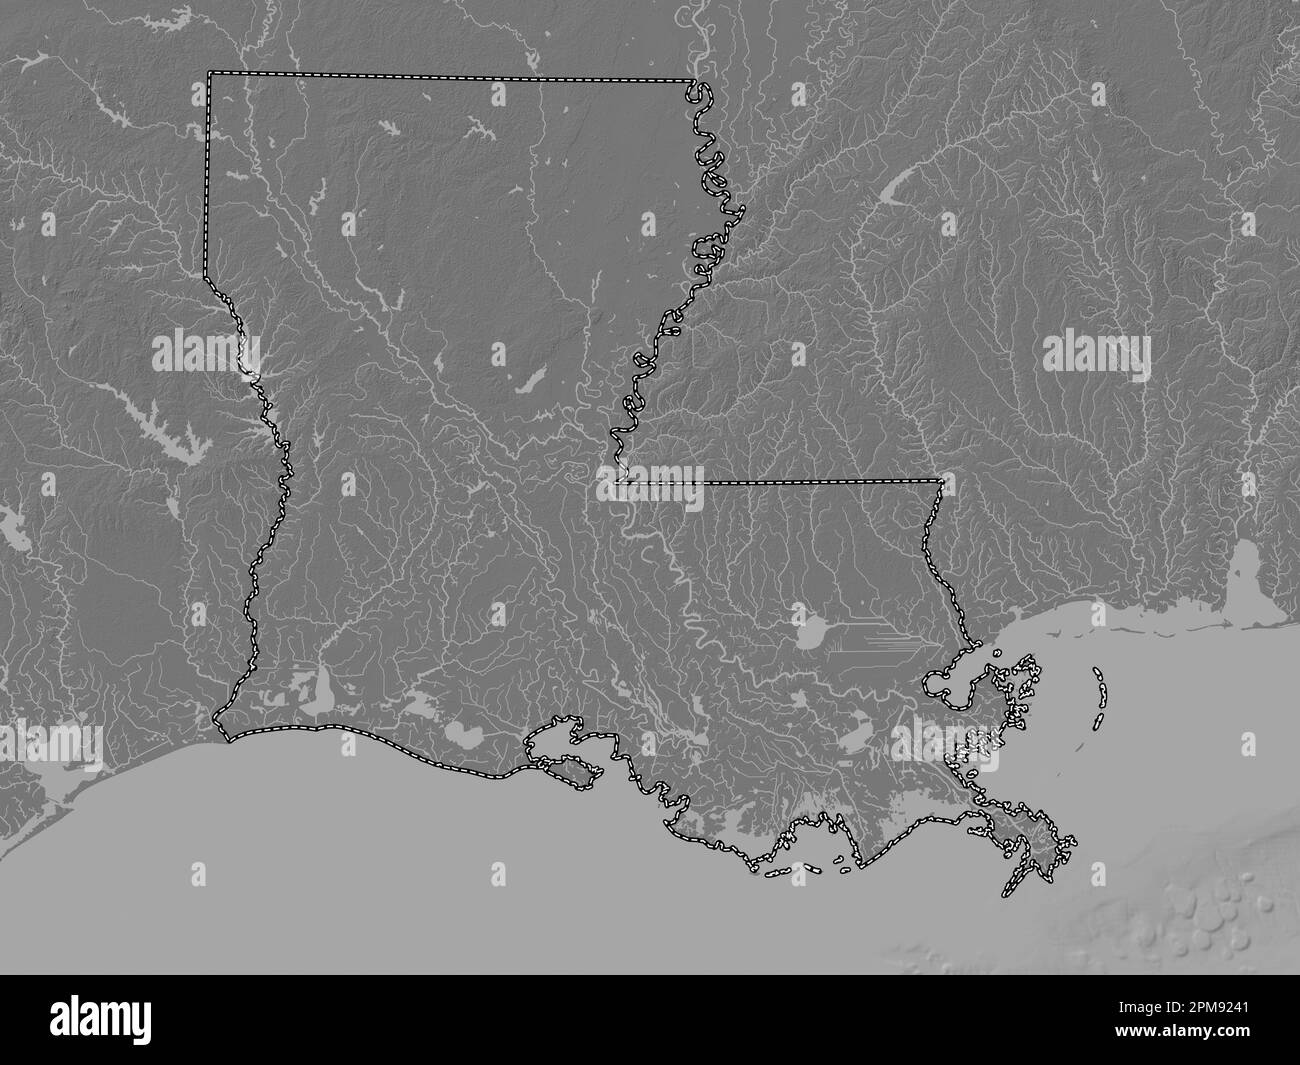 Louisiana, state of United States of America. Bilevel elevation map with lakes and rivers Stock Photo